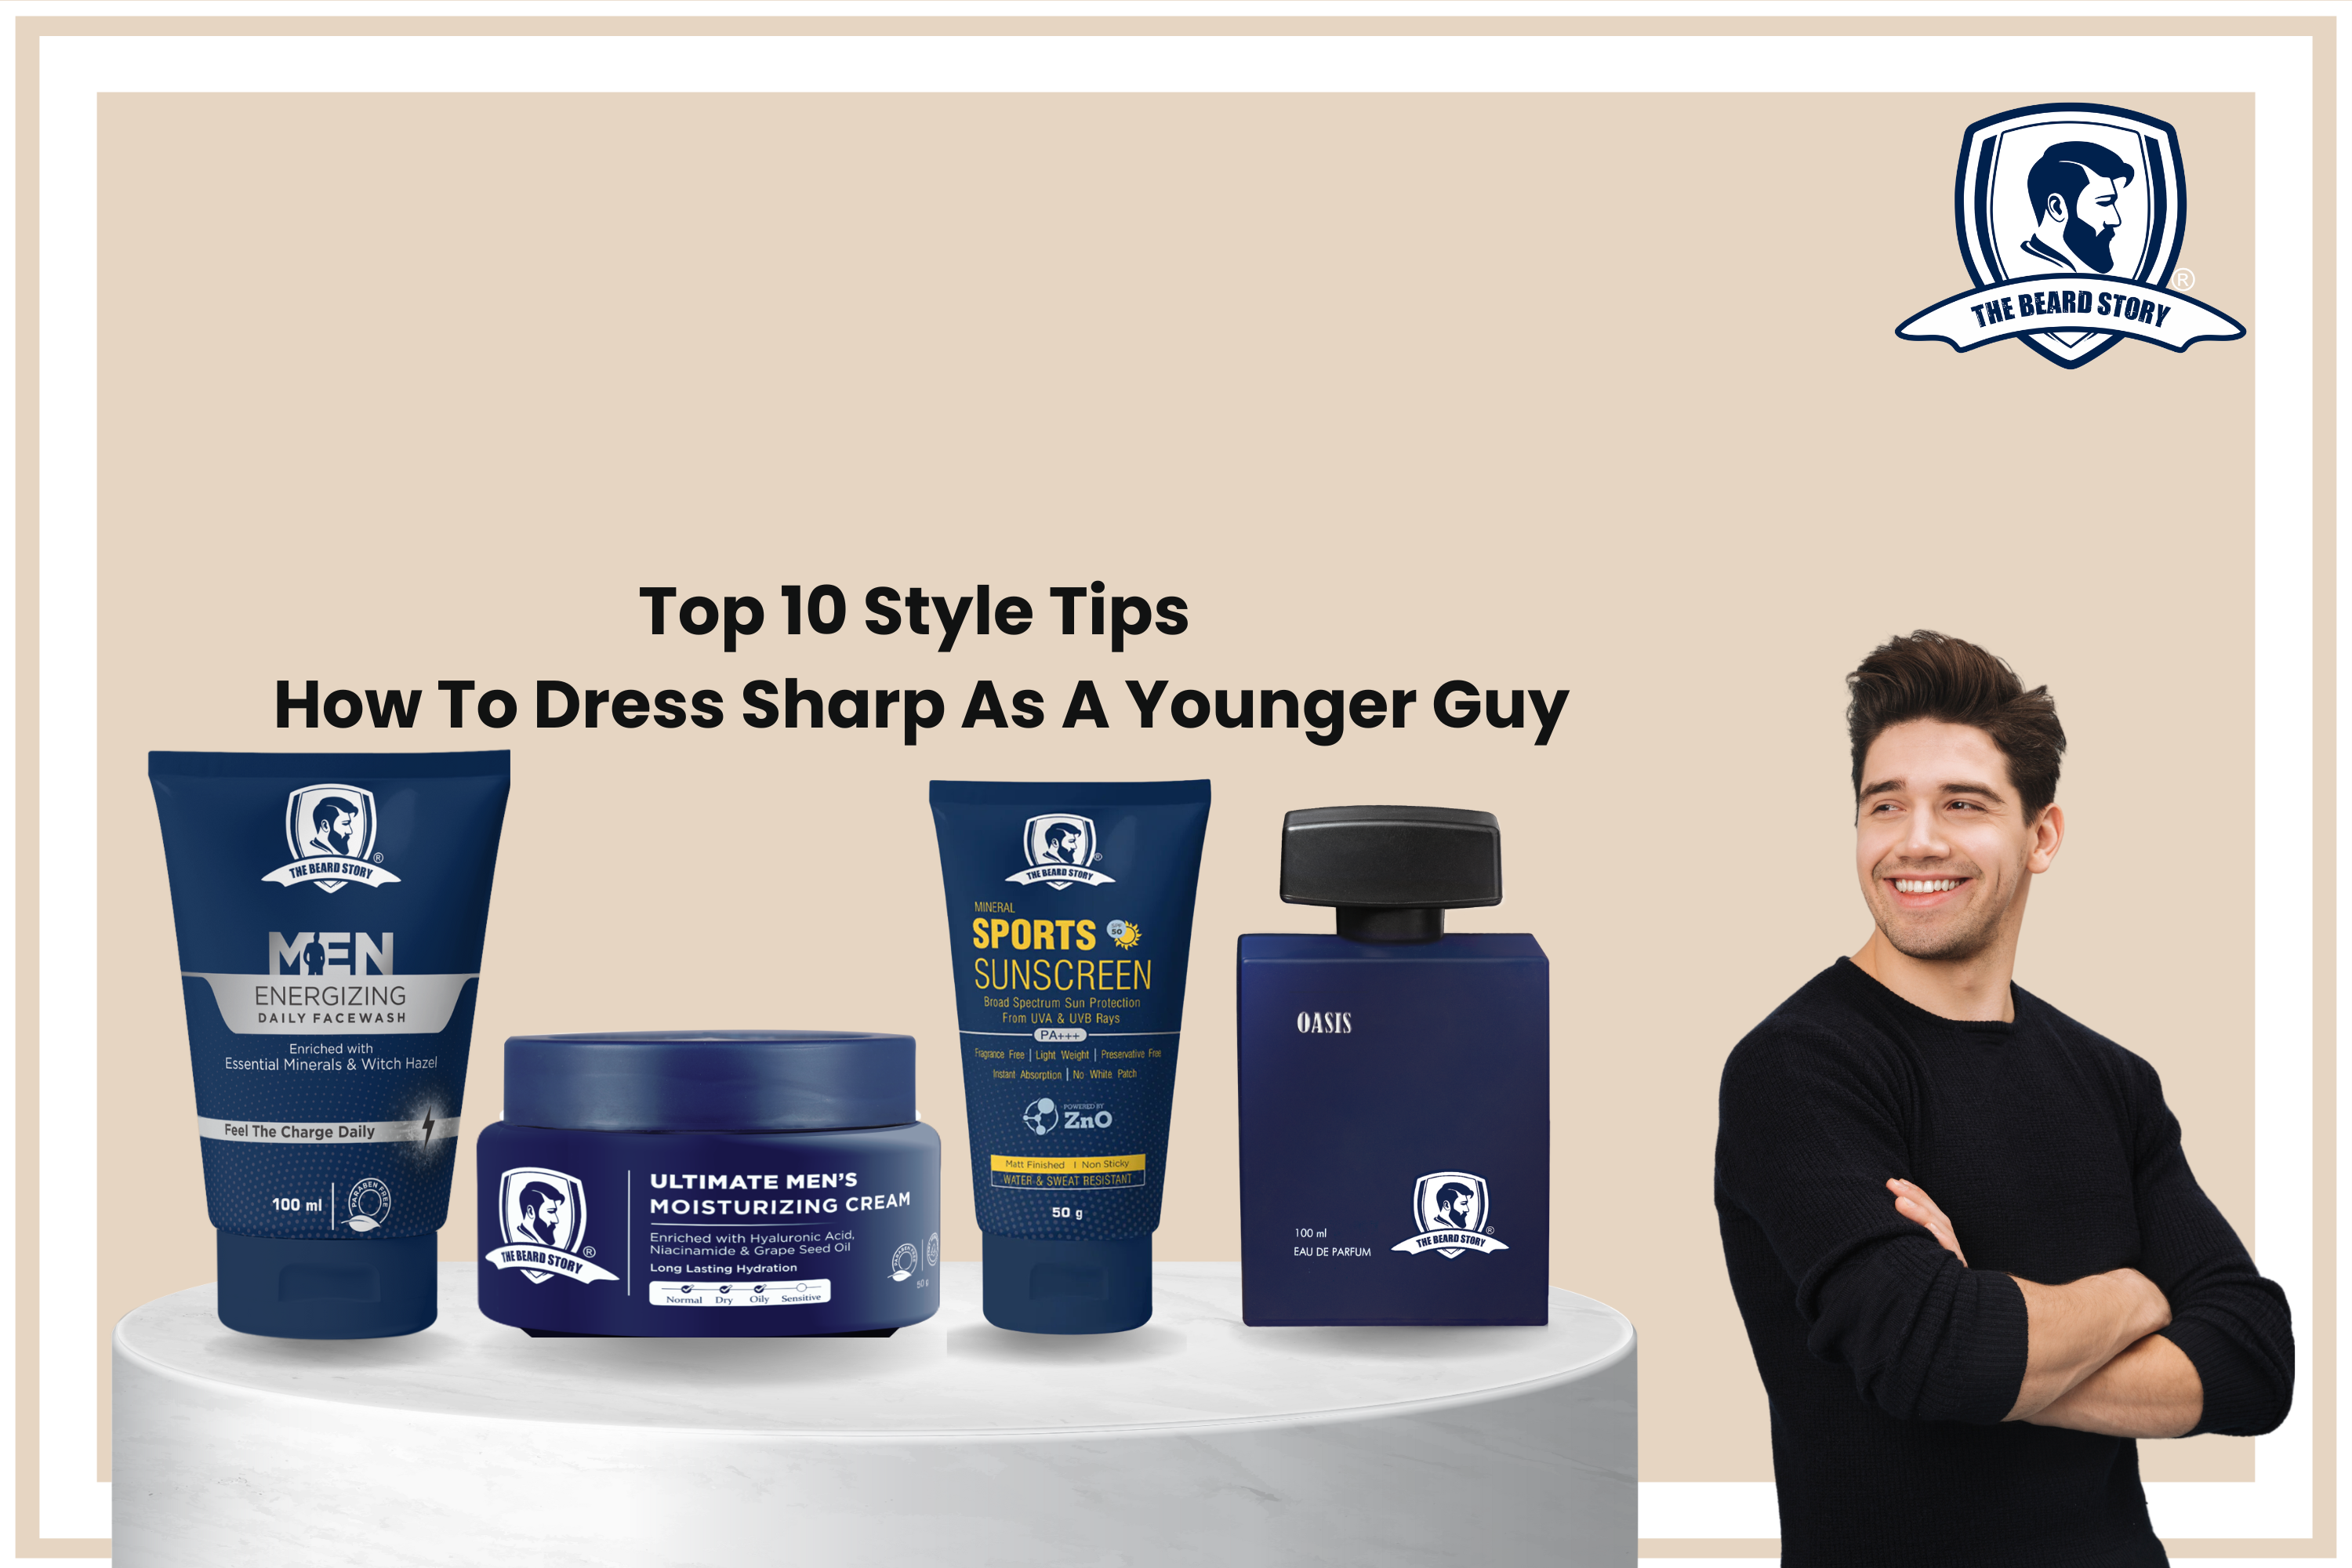 Top 10 Style Tips: How To Dress Sharp As A Younger Guy